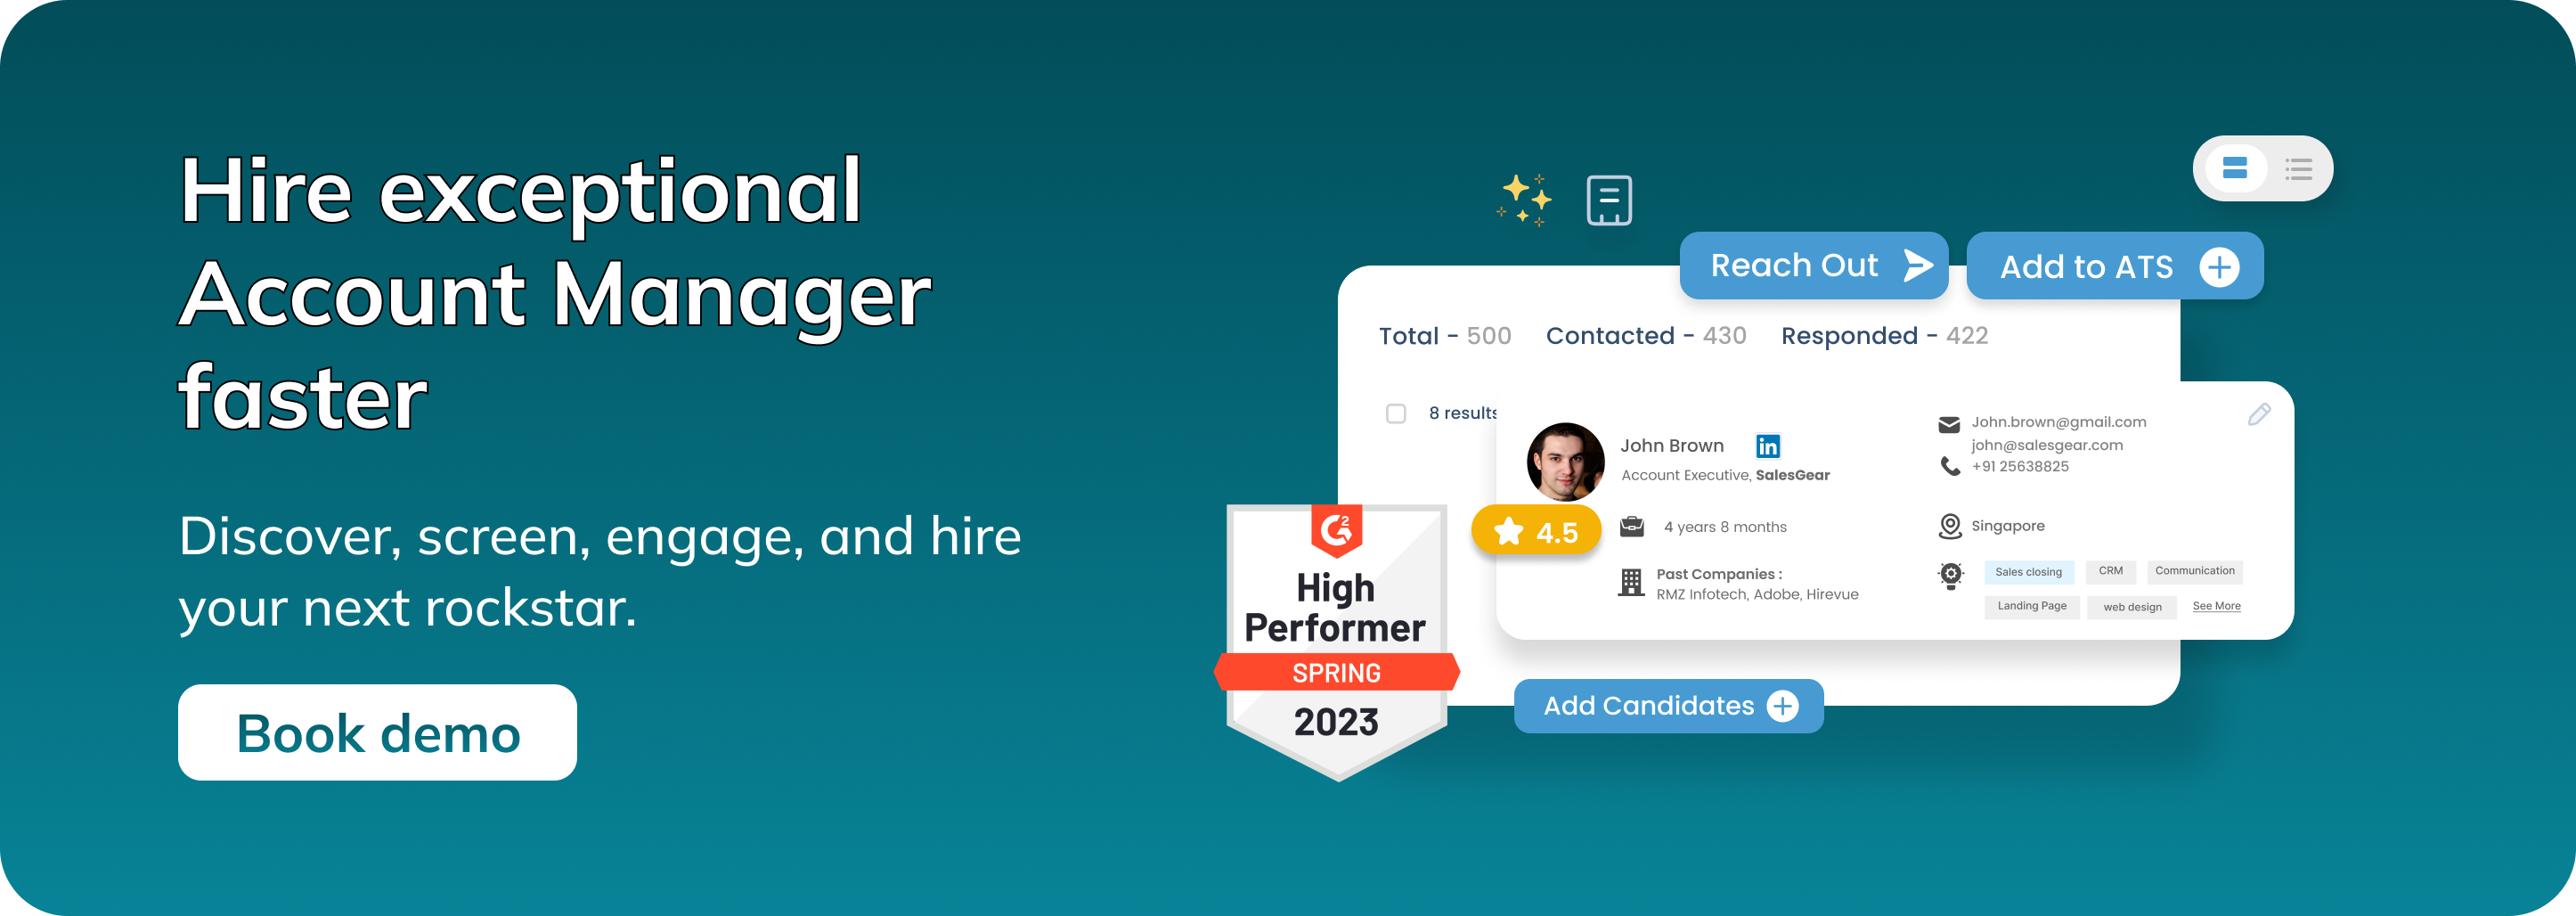 how to hire account manager